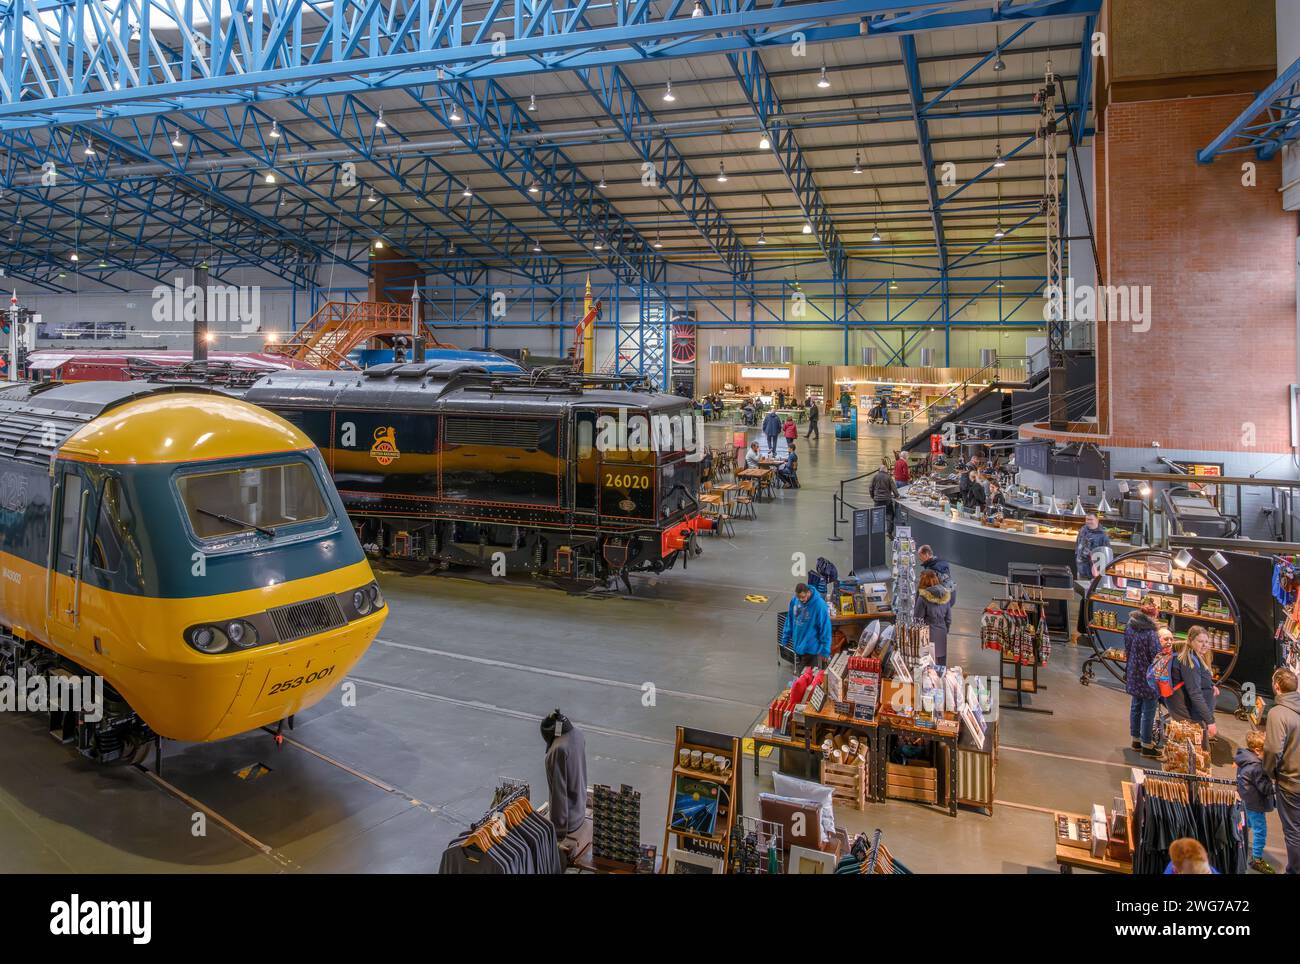 The Great Hall, National Railway Museum, York, Inghilterra. Foto Stock